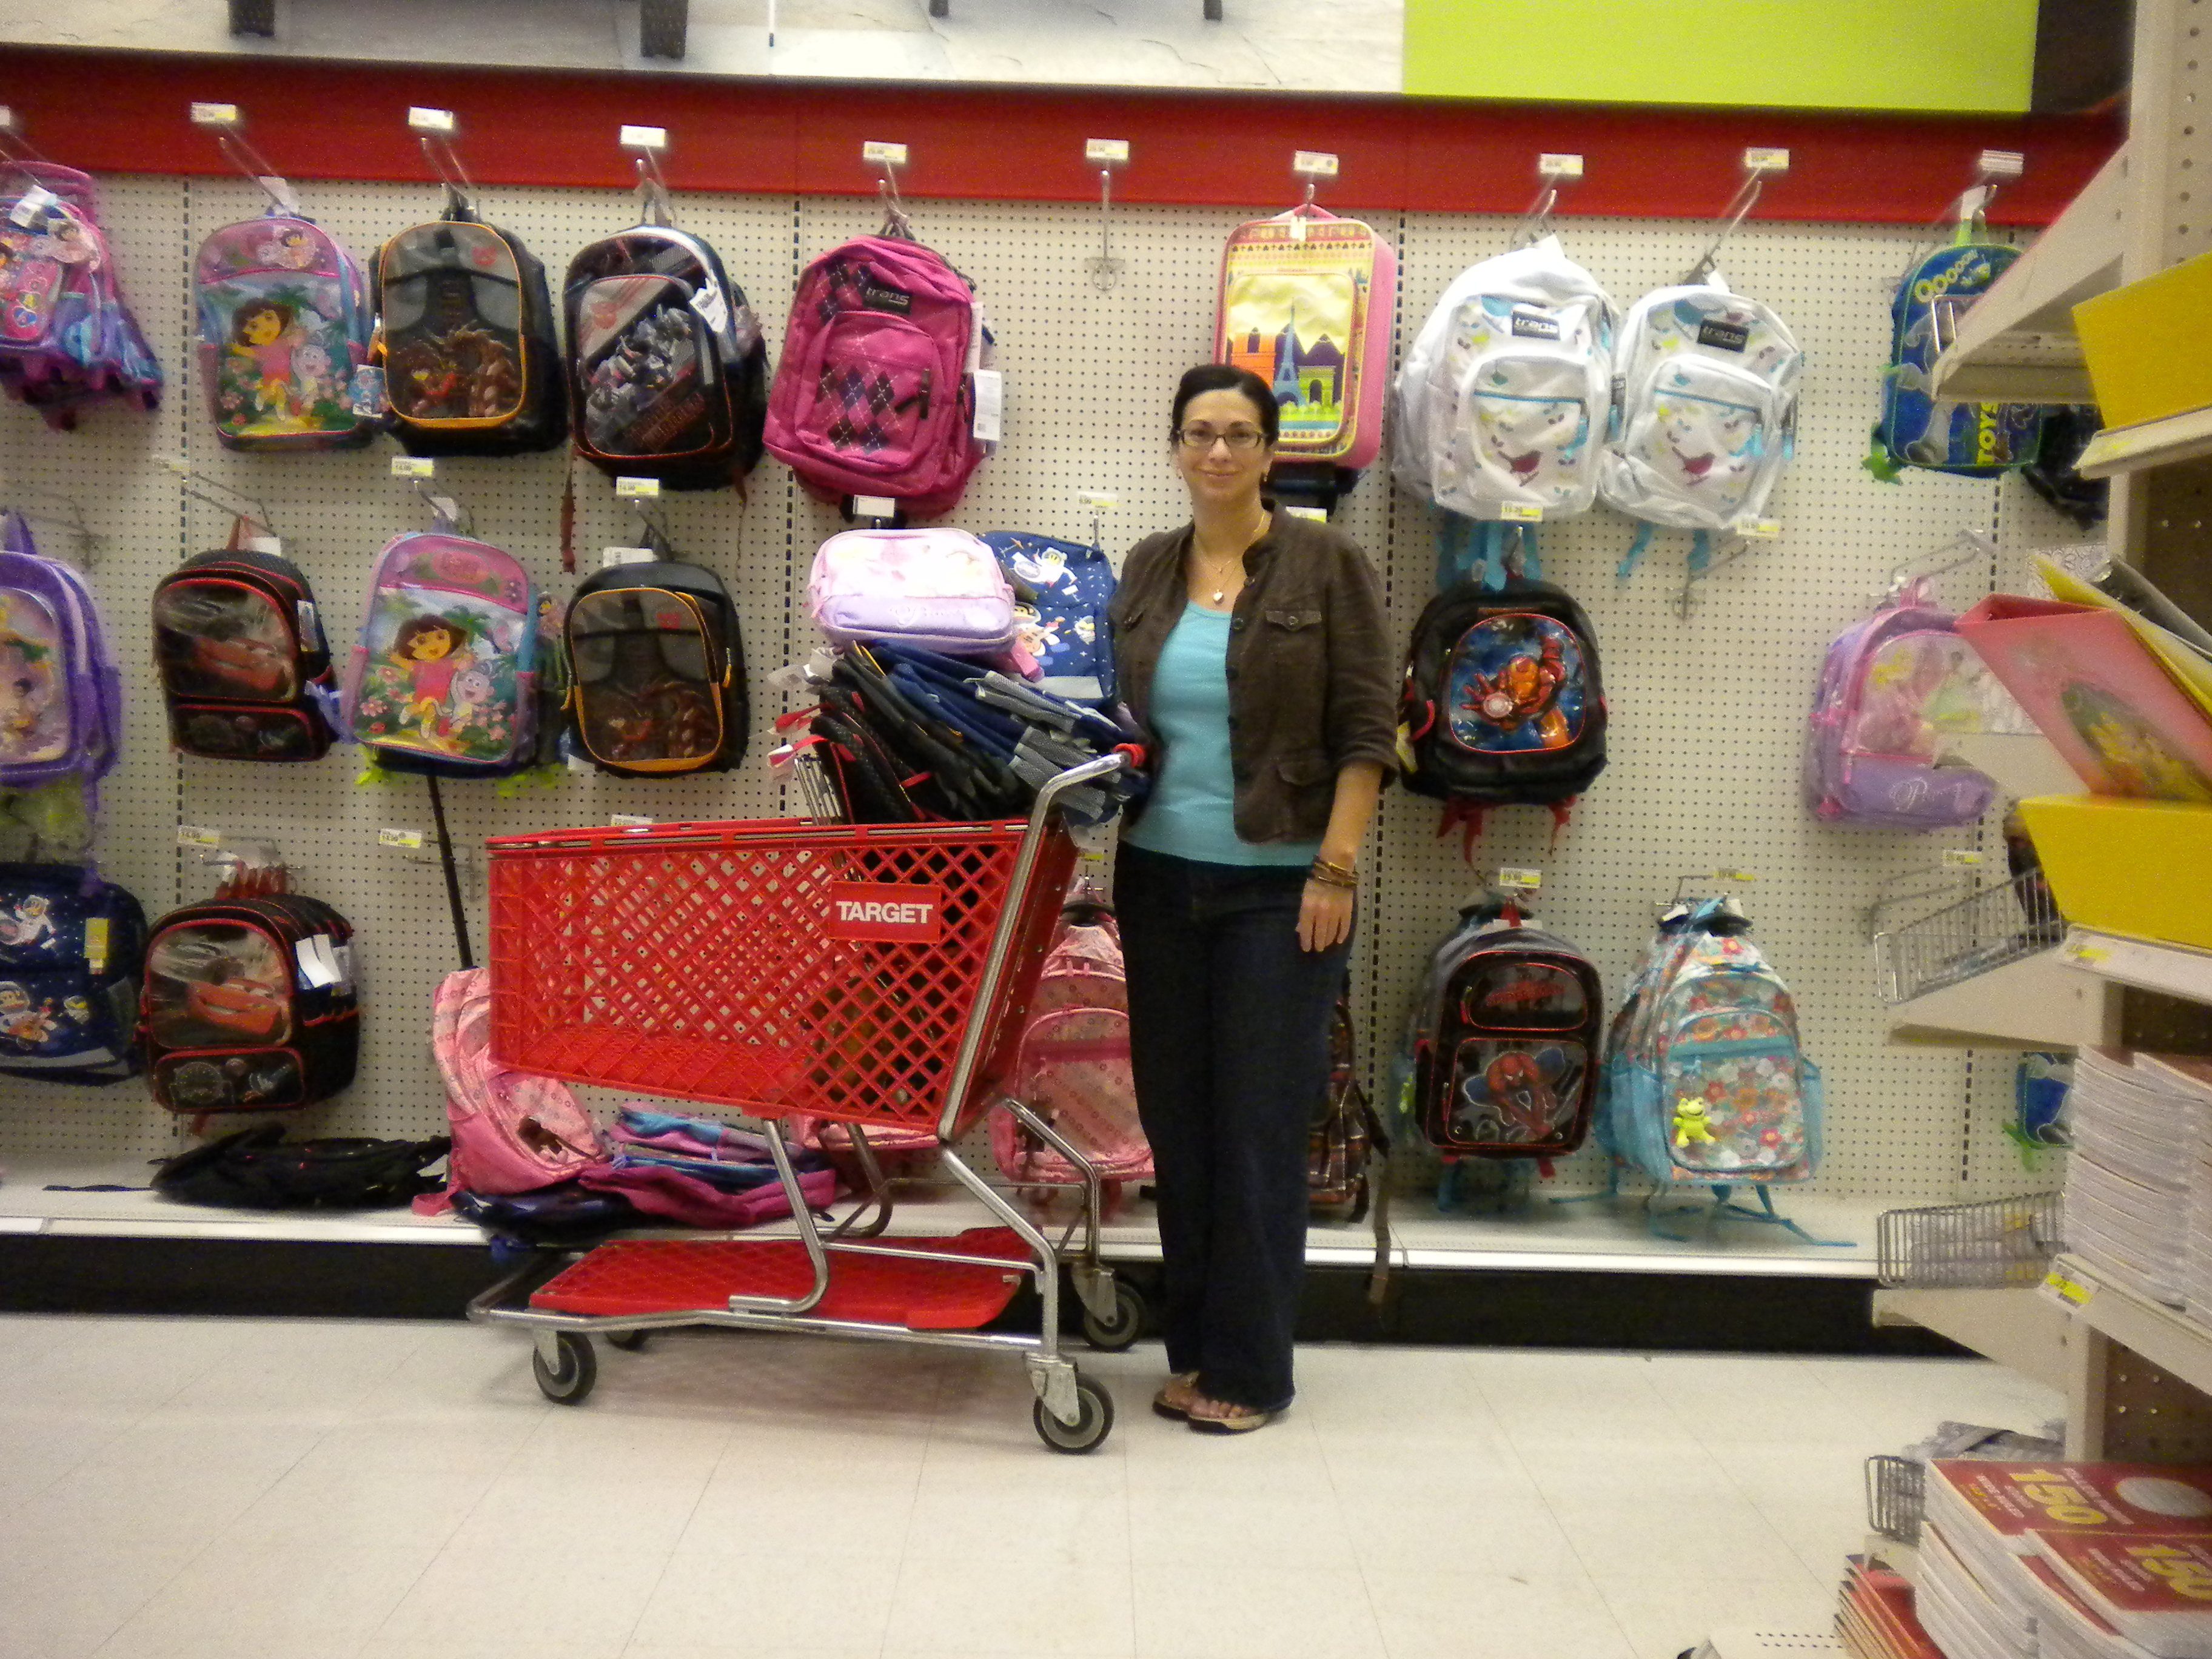 Amanda Hevia had a great time shopping for school supplies with $700.00 worth of Target gift cards.